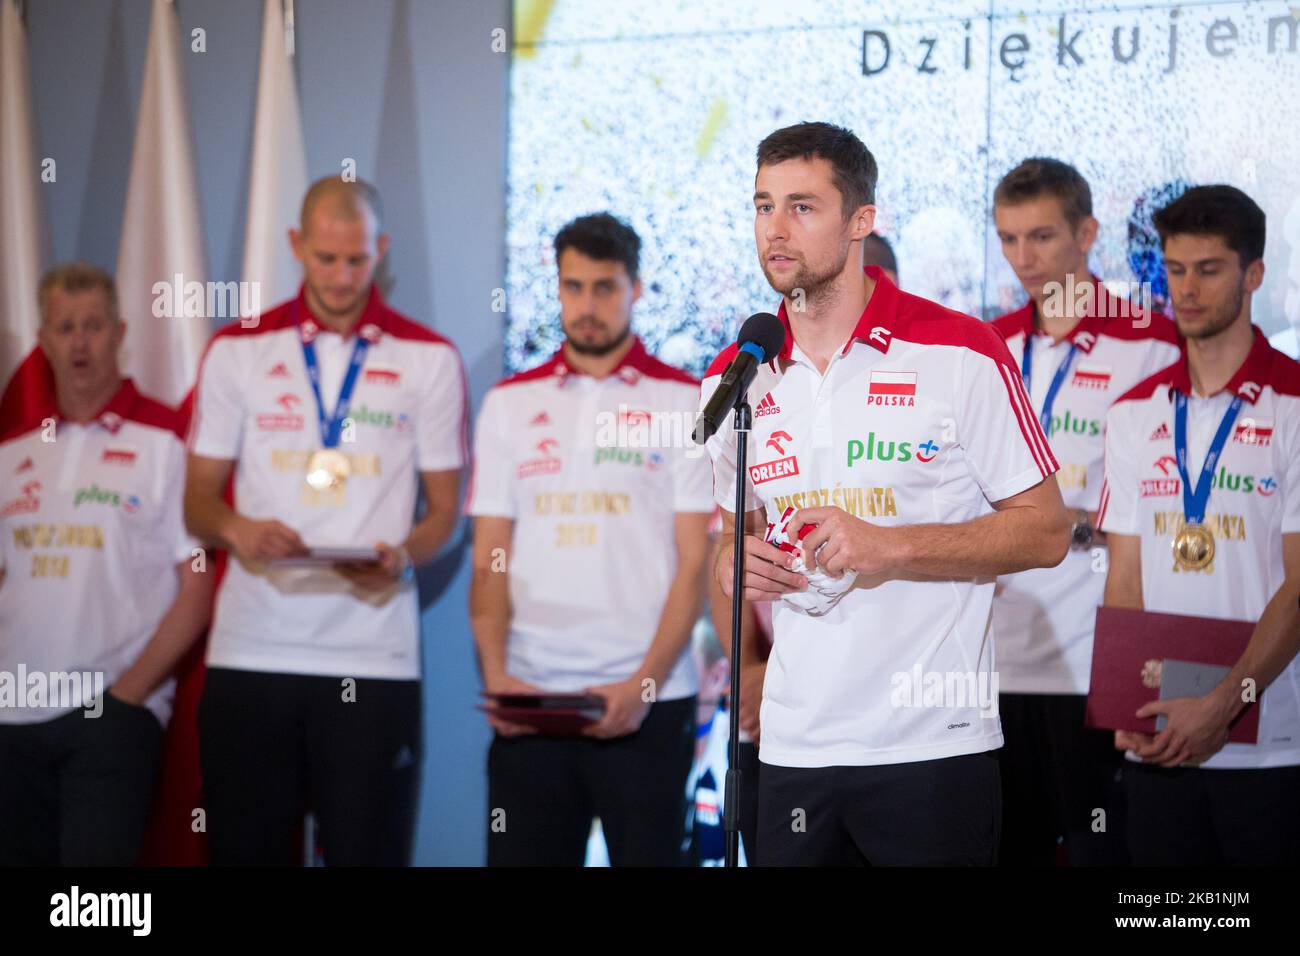 Michal Kubiak and Poland men's national volleyball team during the meeting with Prime Minister of Poland Mateusz Morawiecki at Chancellery of the Prime Minister in Warsaw, Poland on 1 October 2018. Poland won the gold medal after defeating Brazil in FIVB Volleyball Men's World Championship Final in Turin on 30 September. (Photo by Mateusz Wlodarczyk/NurPhoto) Stock Photo